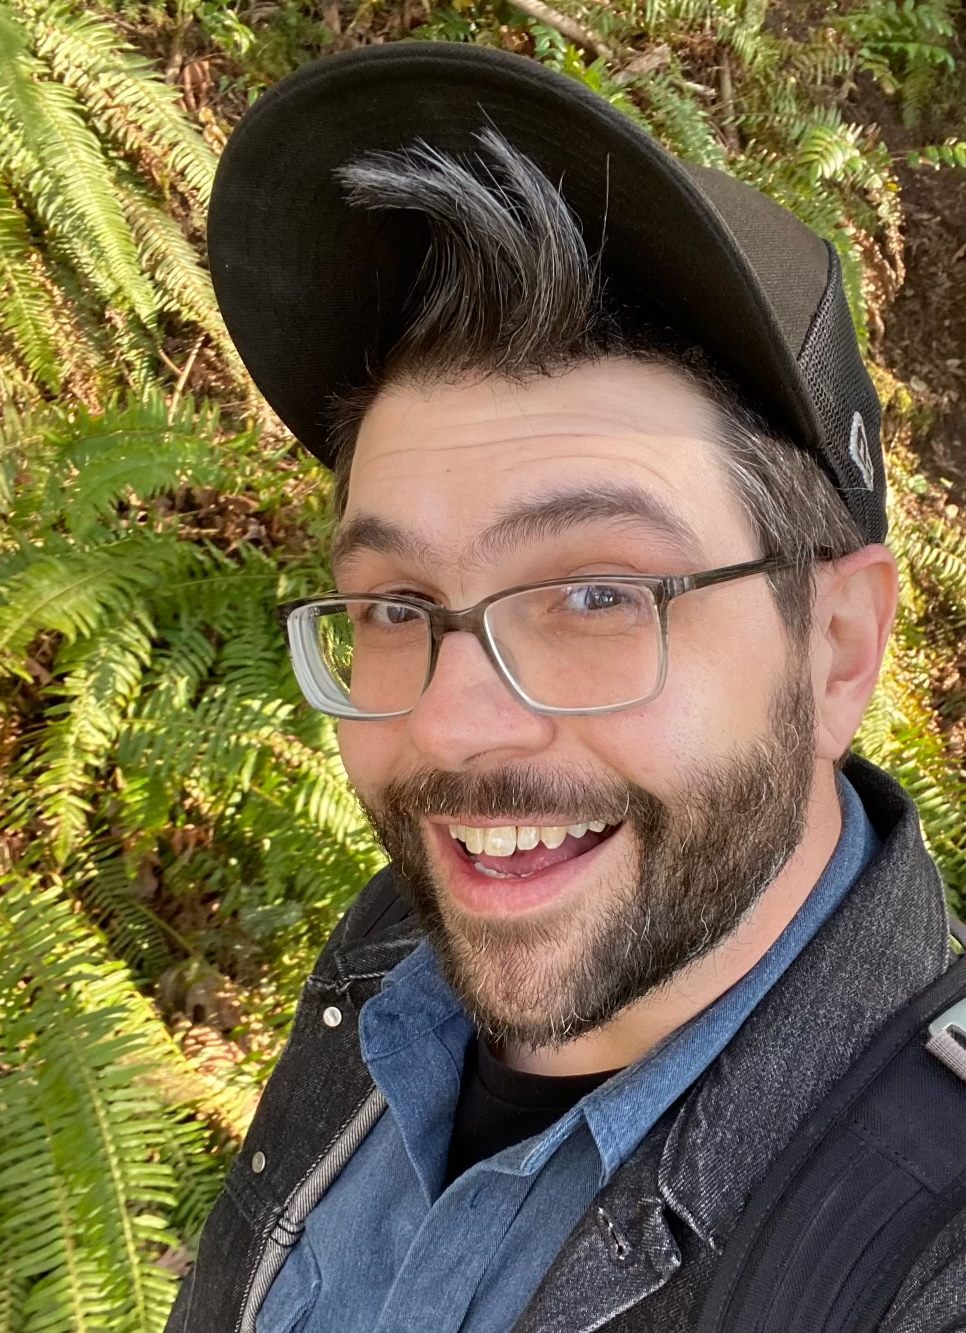 Josh is smiling, has a full beard, is wearing a hat and glasses. There are ferns and tress in the background.